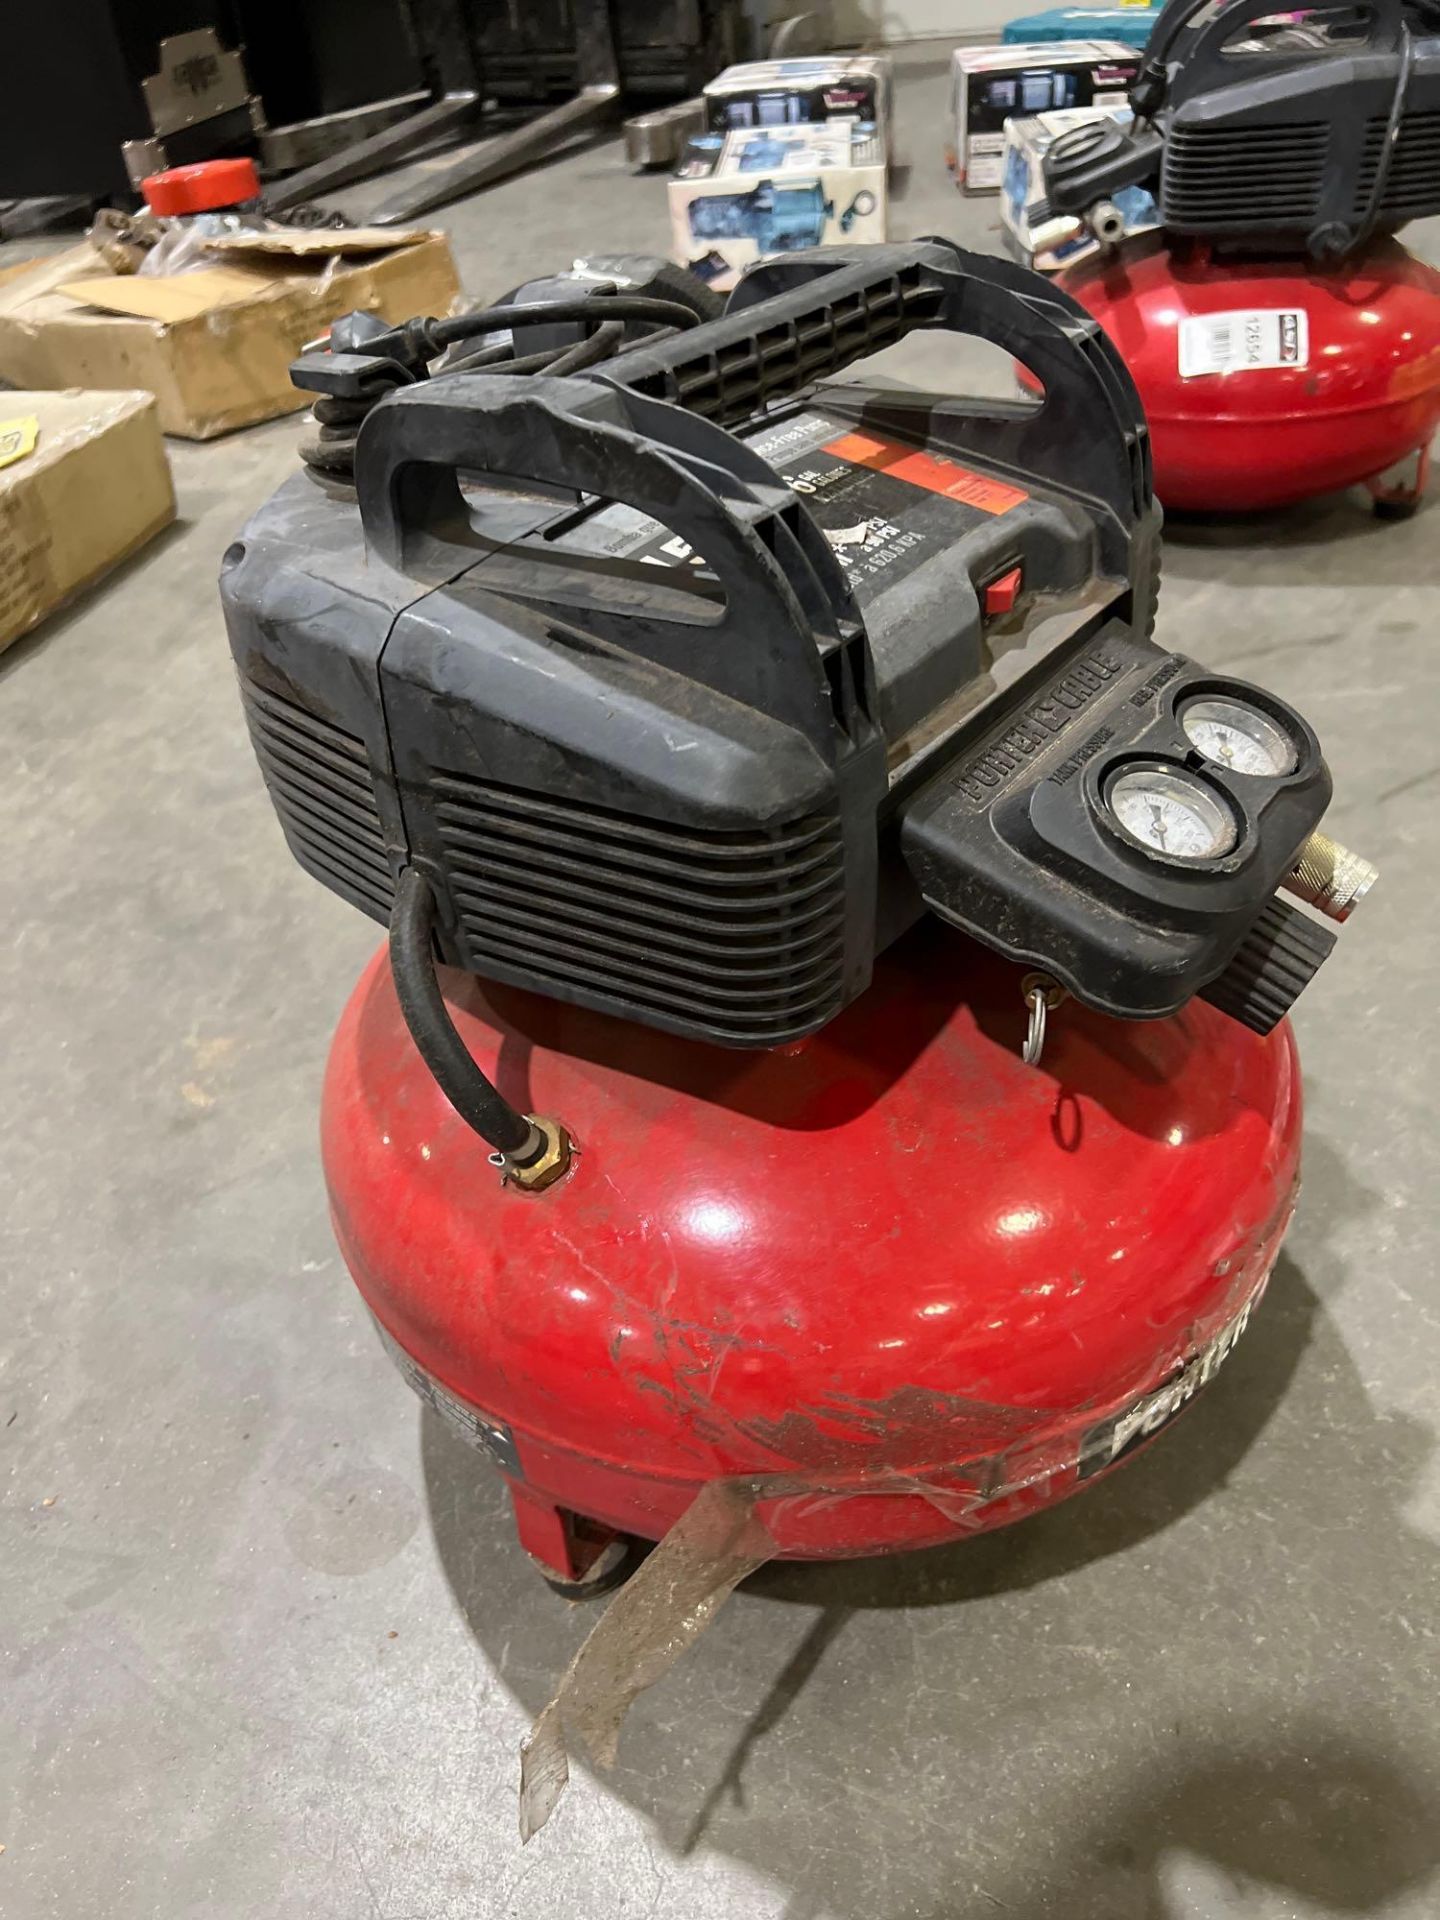 PORTER CABLE 6 GAL 150 PSI PORTABLE ELECTRIC PANCAKE AIR COMPRESSOR MODEL C2002 - Image 3 of 3